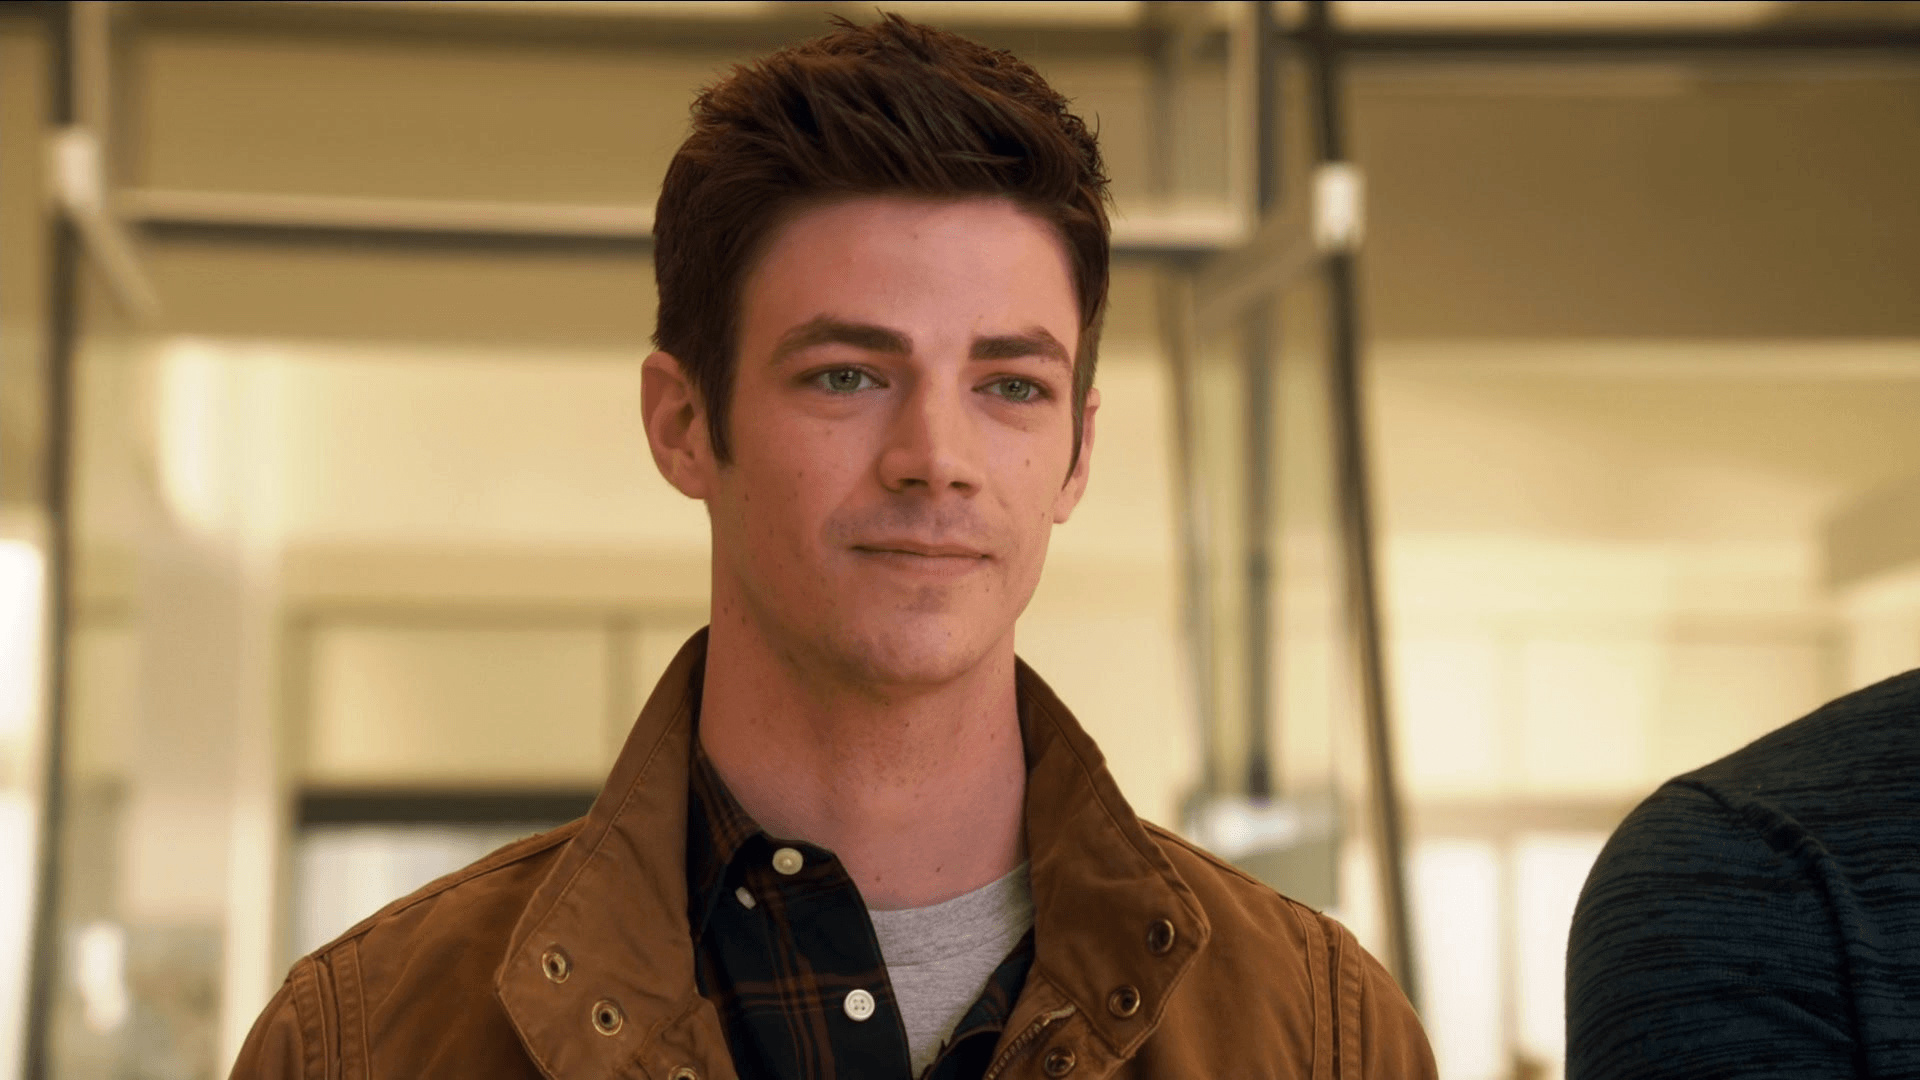 Barry Allen wallpapers, HD wallpapers for phones, Mobile wallpaper collection, The Flash's alter ego, 1920x1080 Full HD Desktop